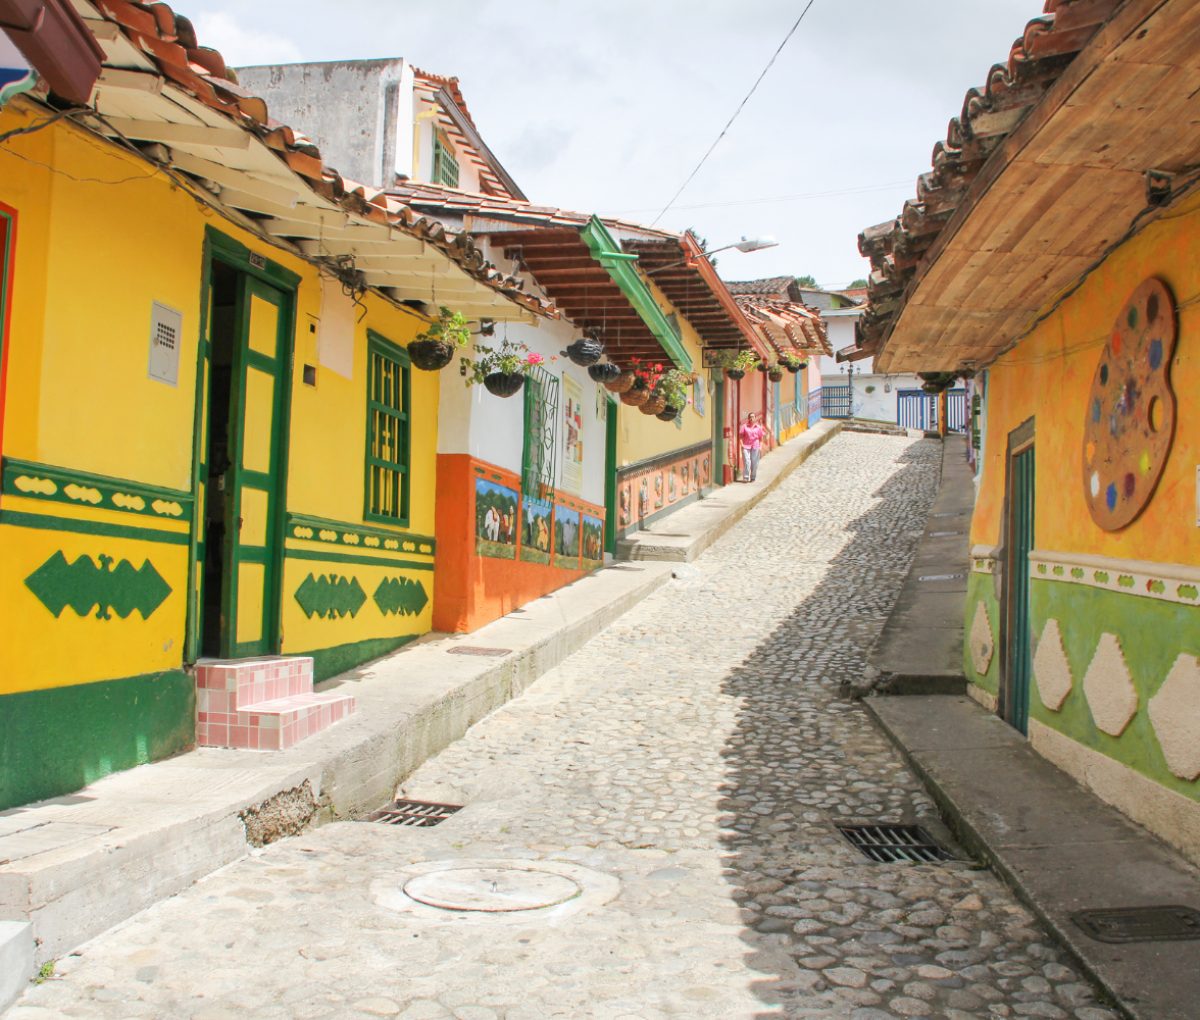 The streets of Guatapé